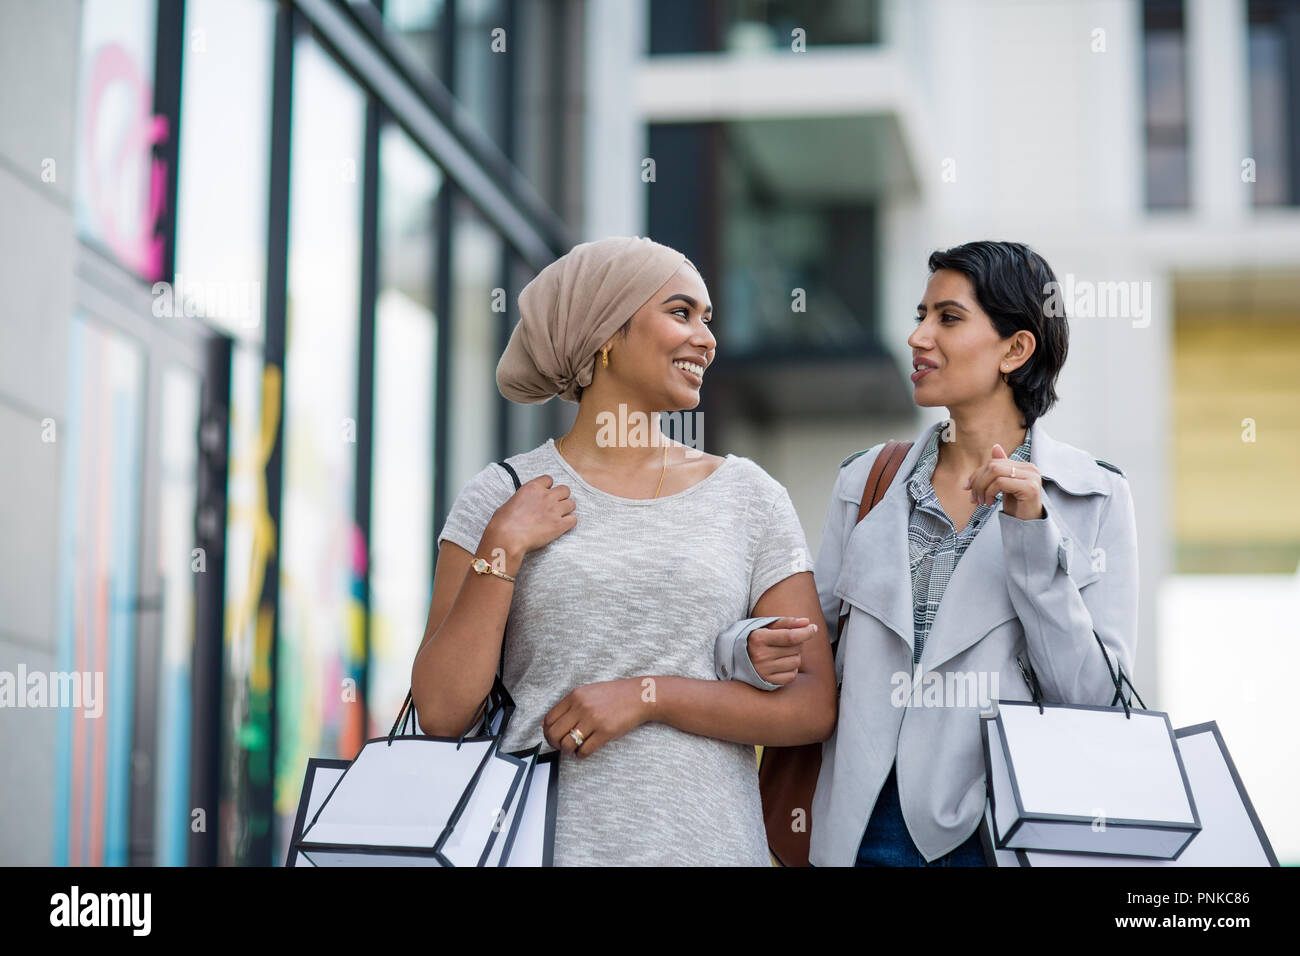 Muslim friends shopping together outdoors Stock Photo